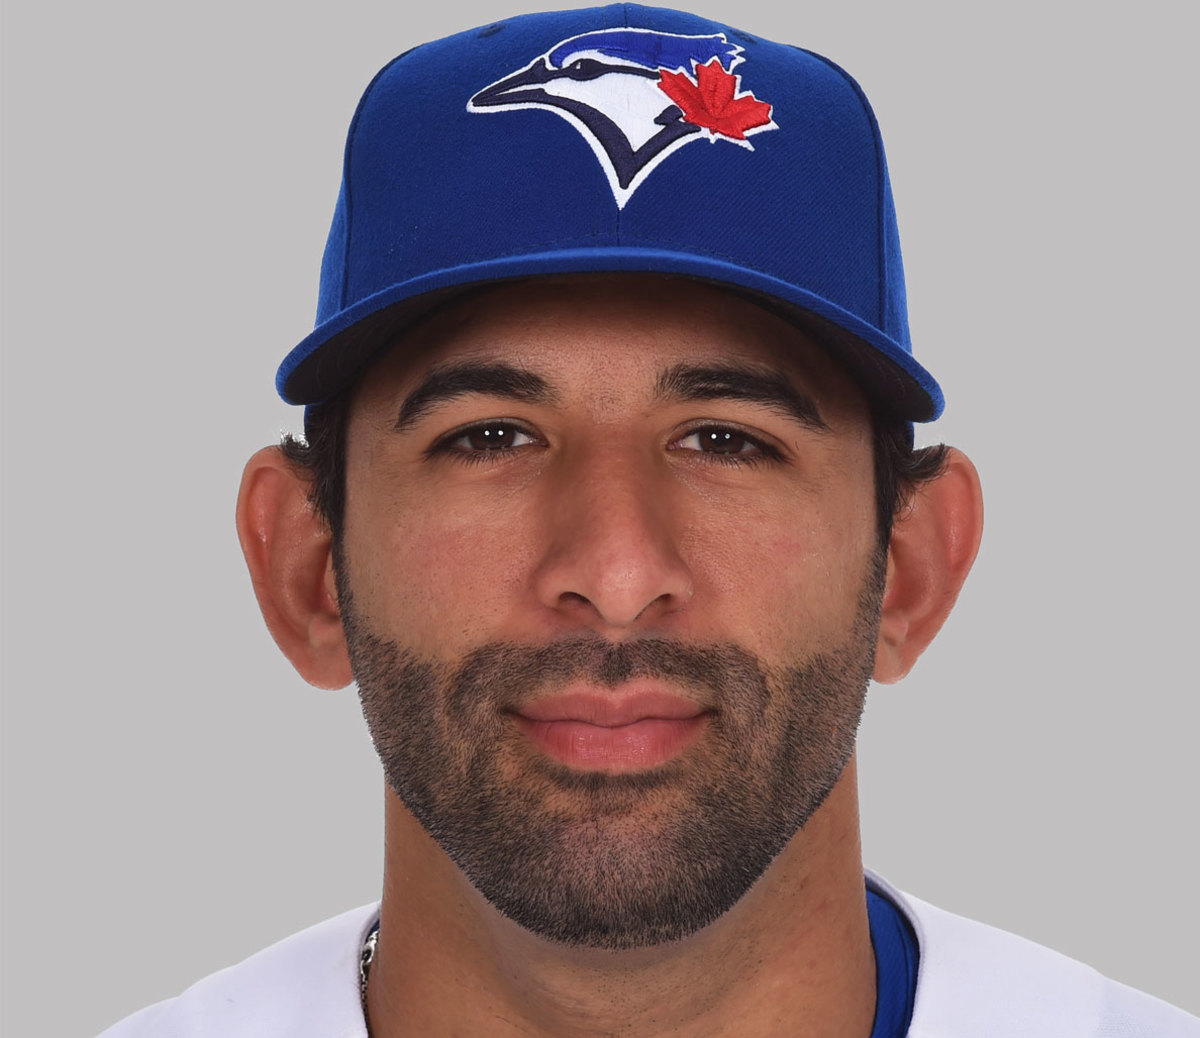 Jose Bautista working out as pitcher